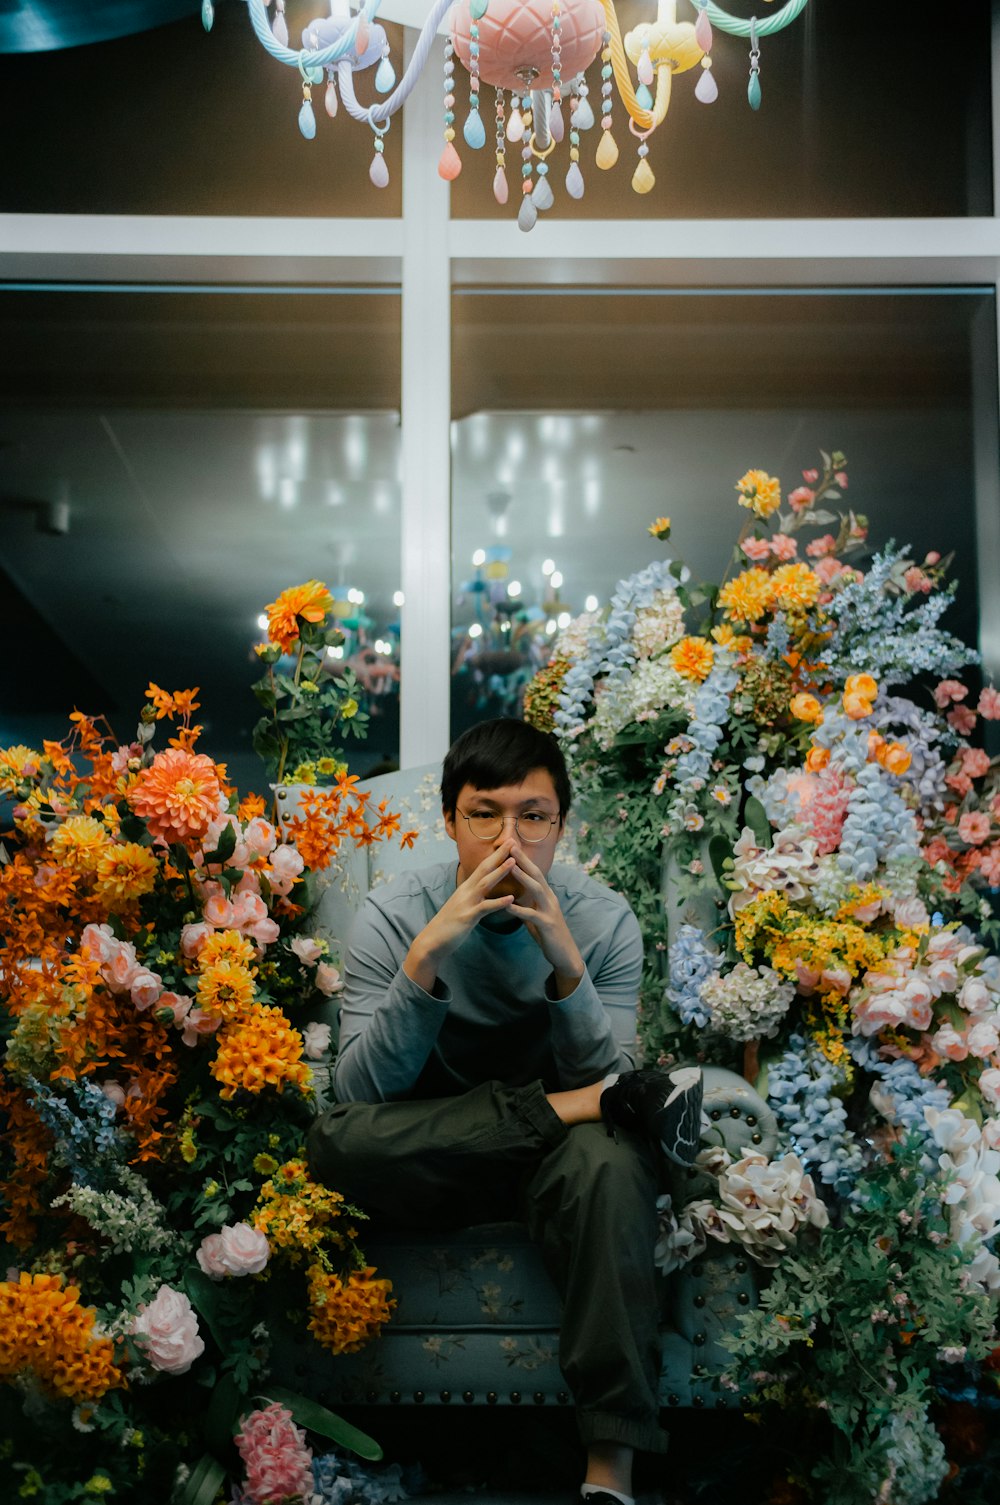 a man sitting on a bench surrounded by flowers